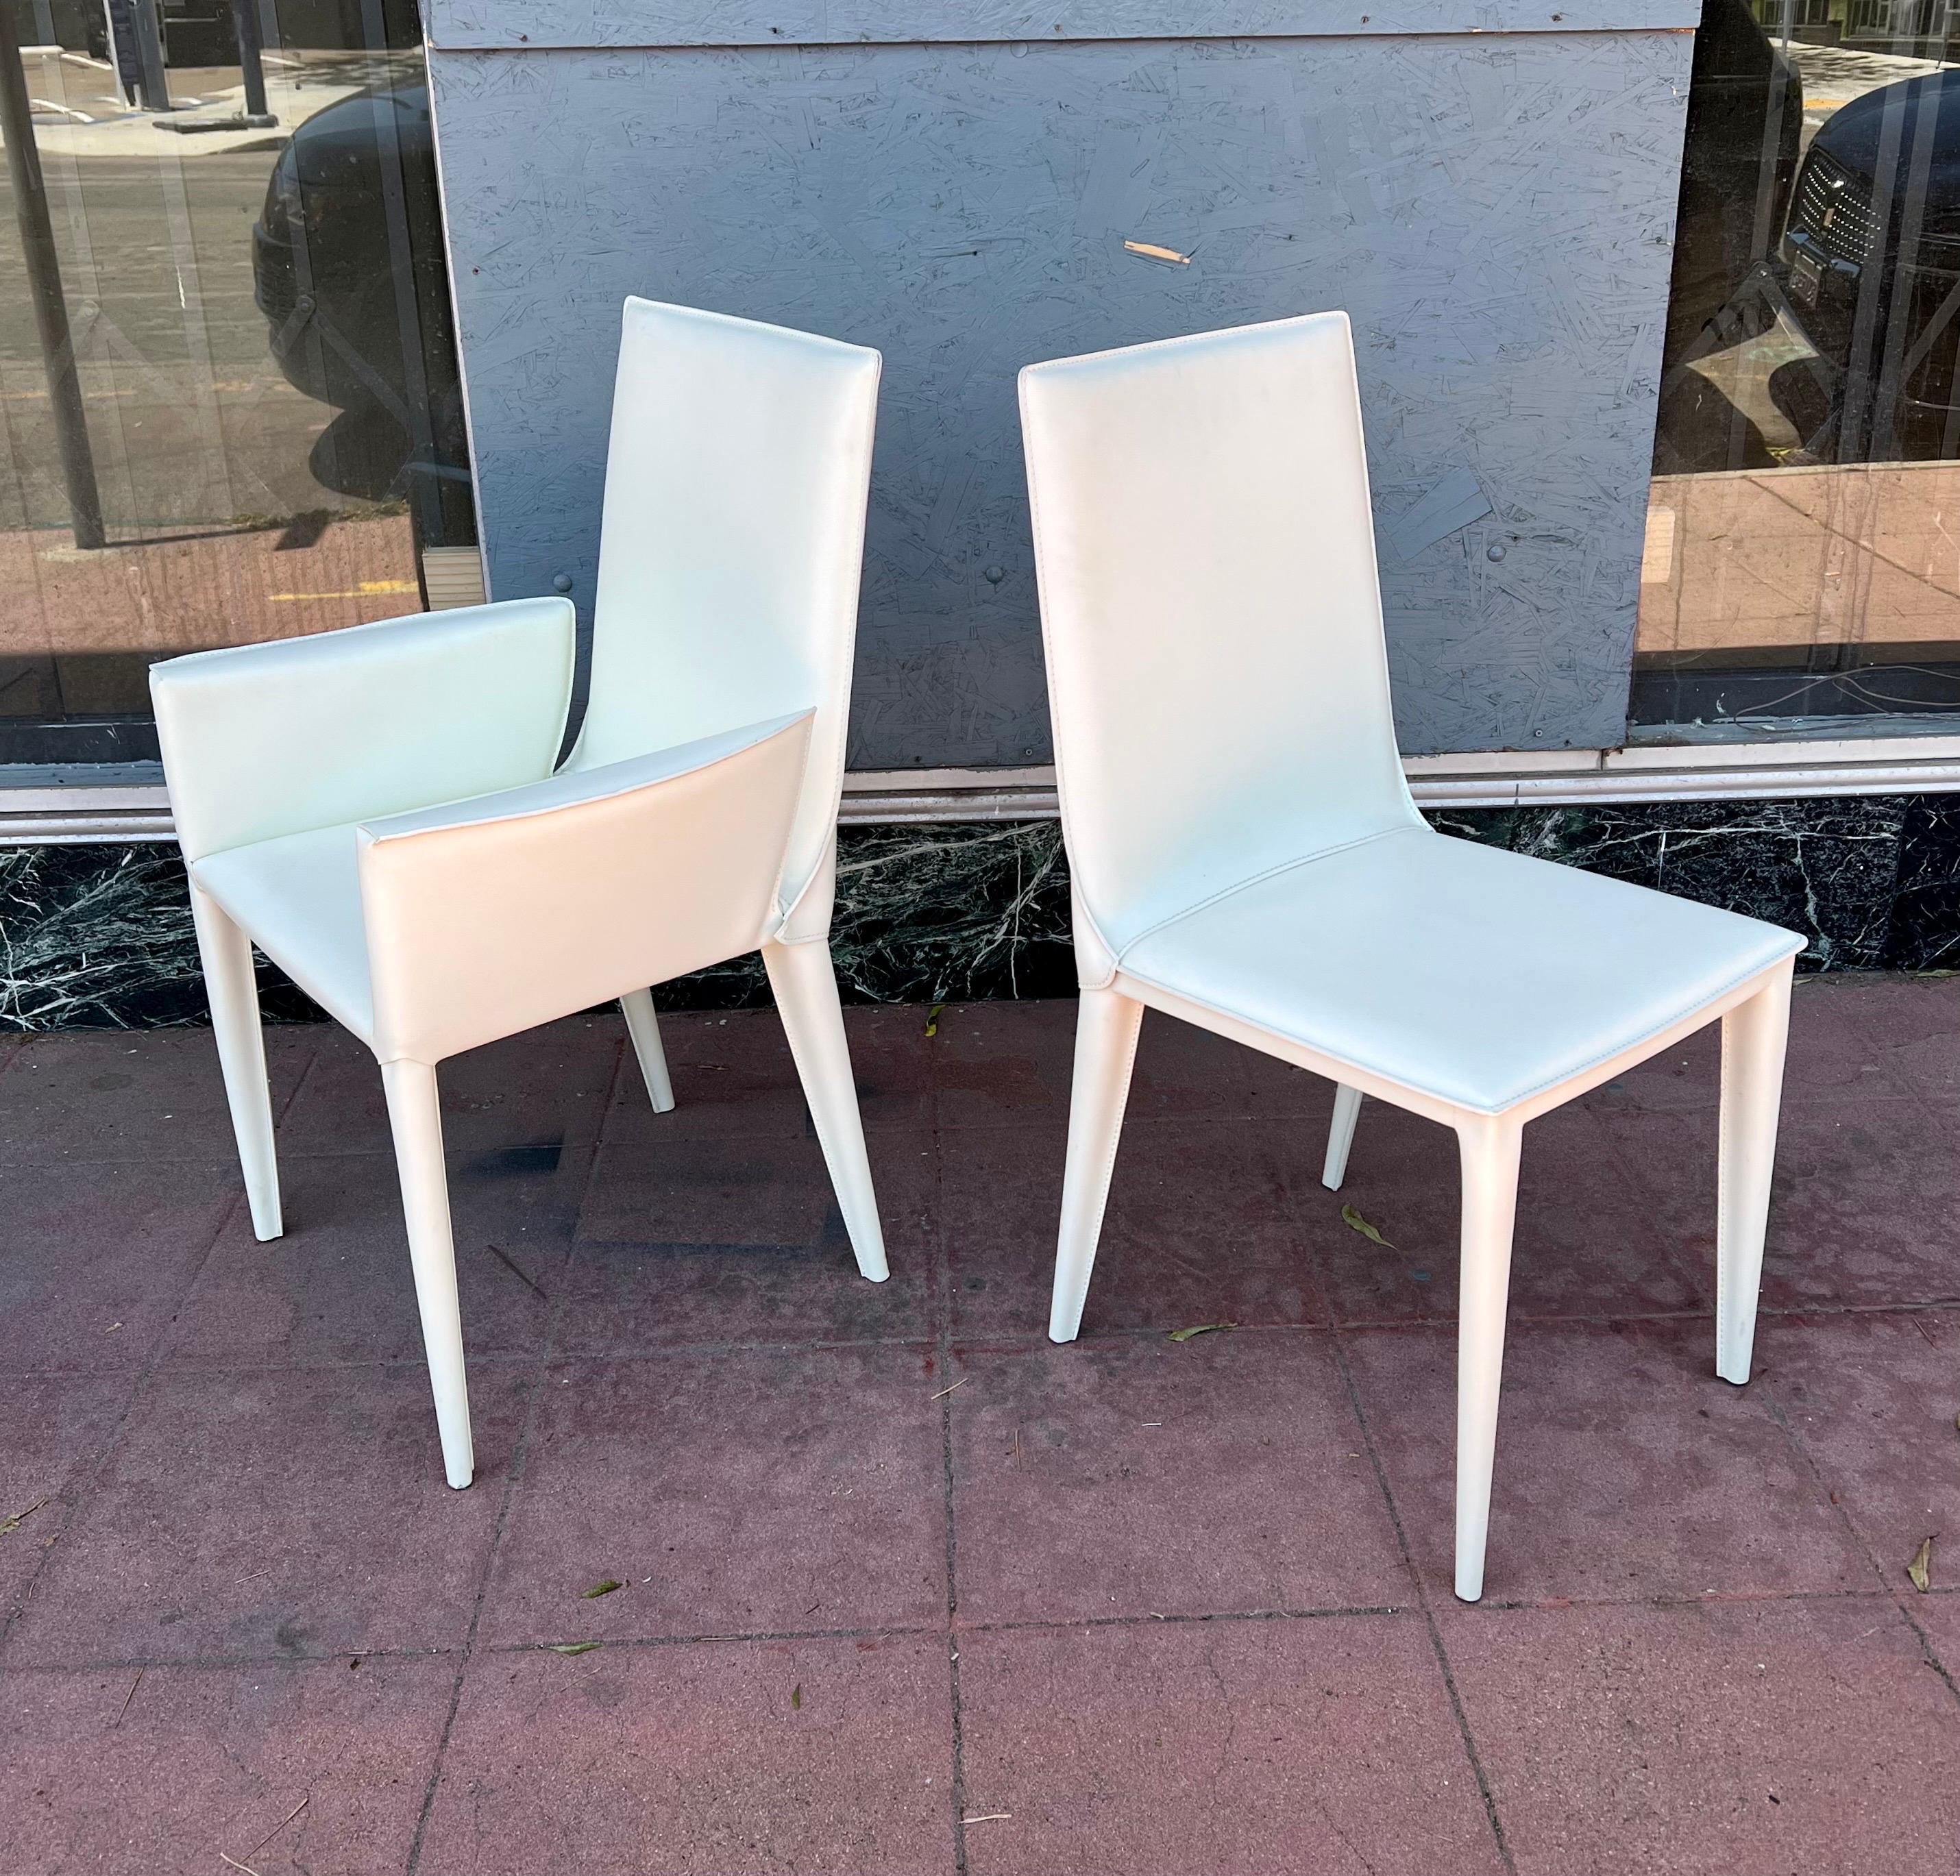 Postmodern Set of 4 Chairs in White Leather Bottega by Frag, Italy 2